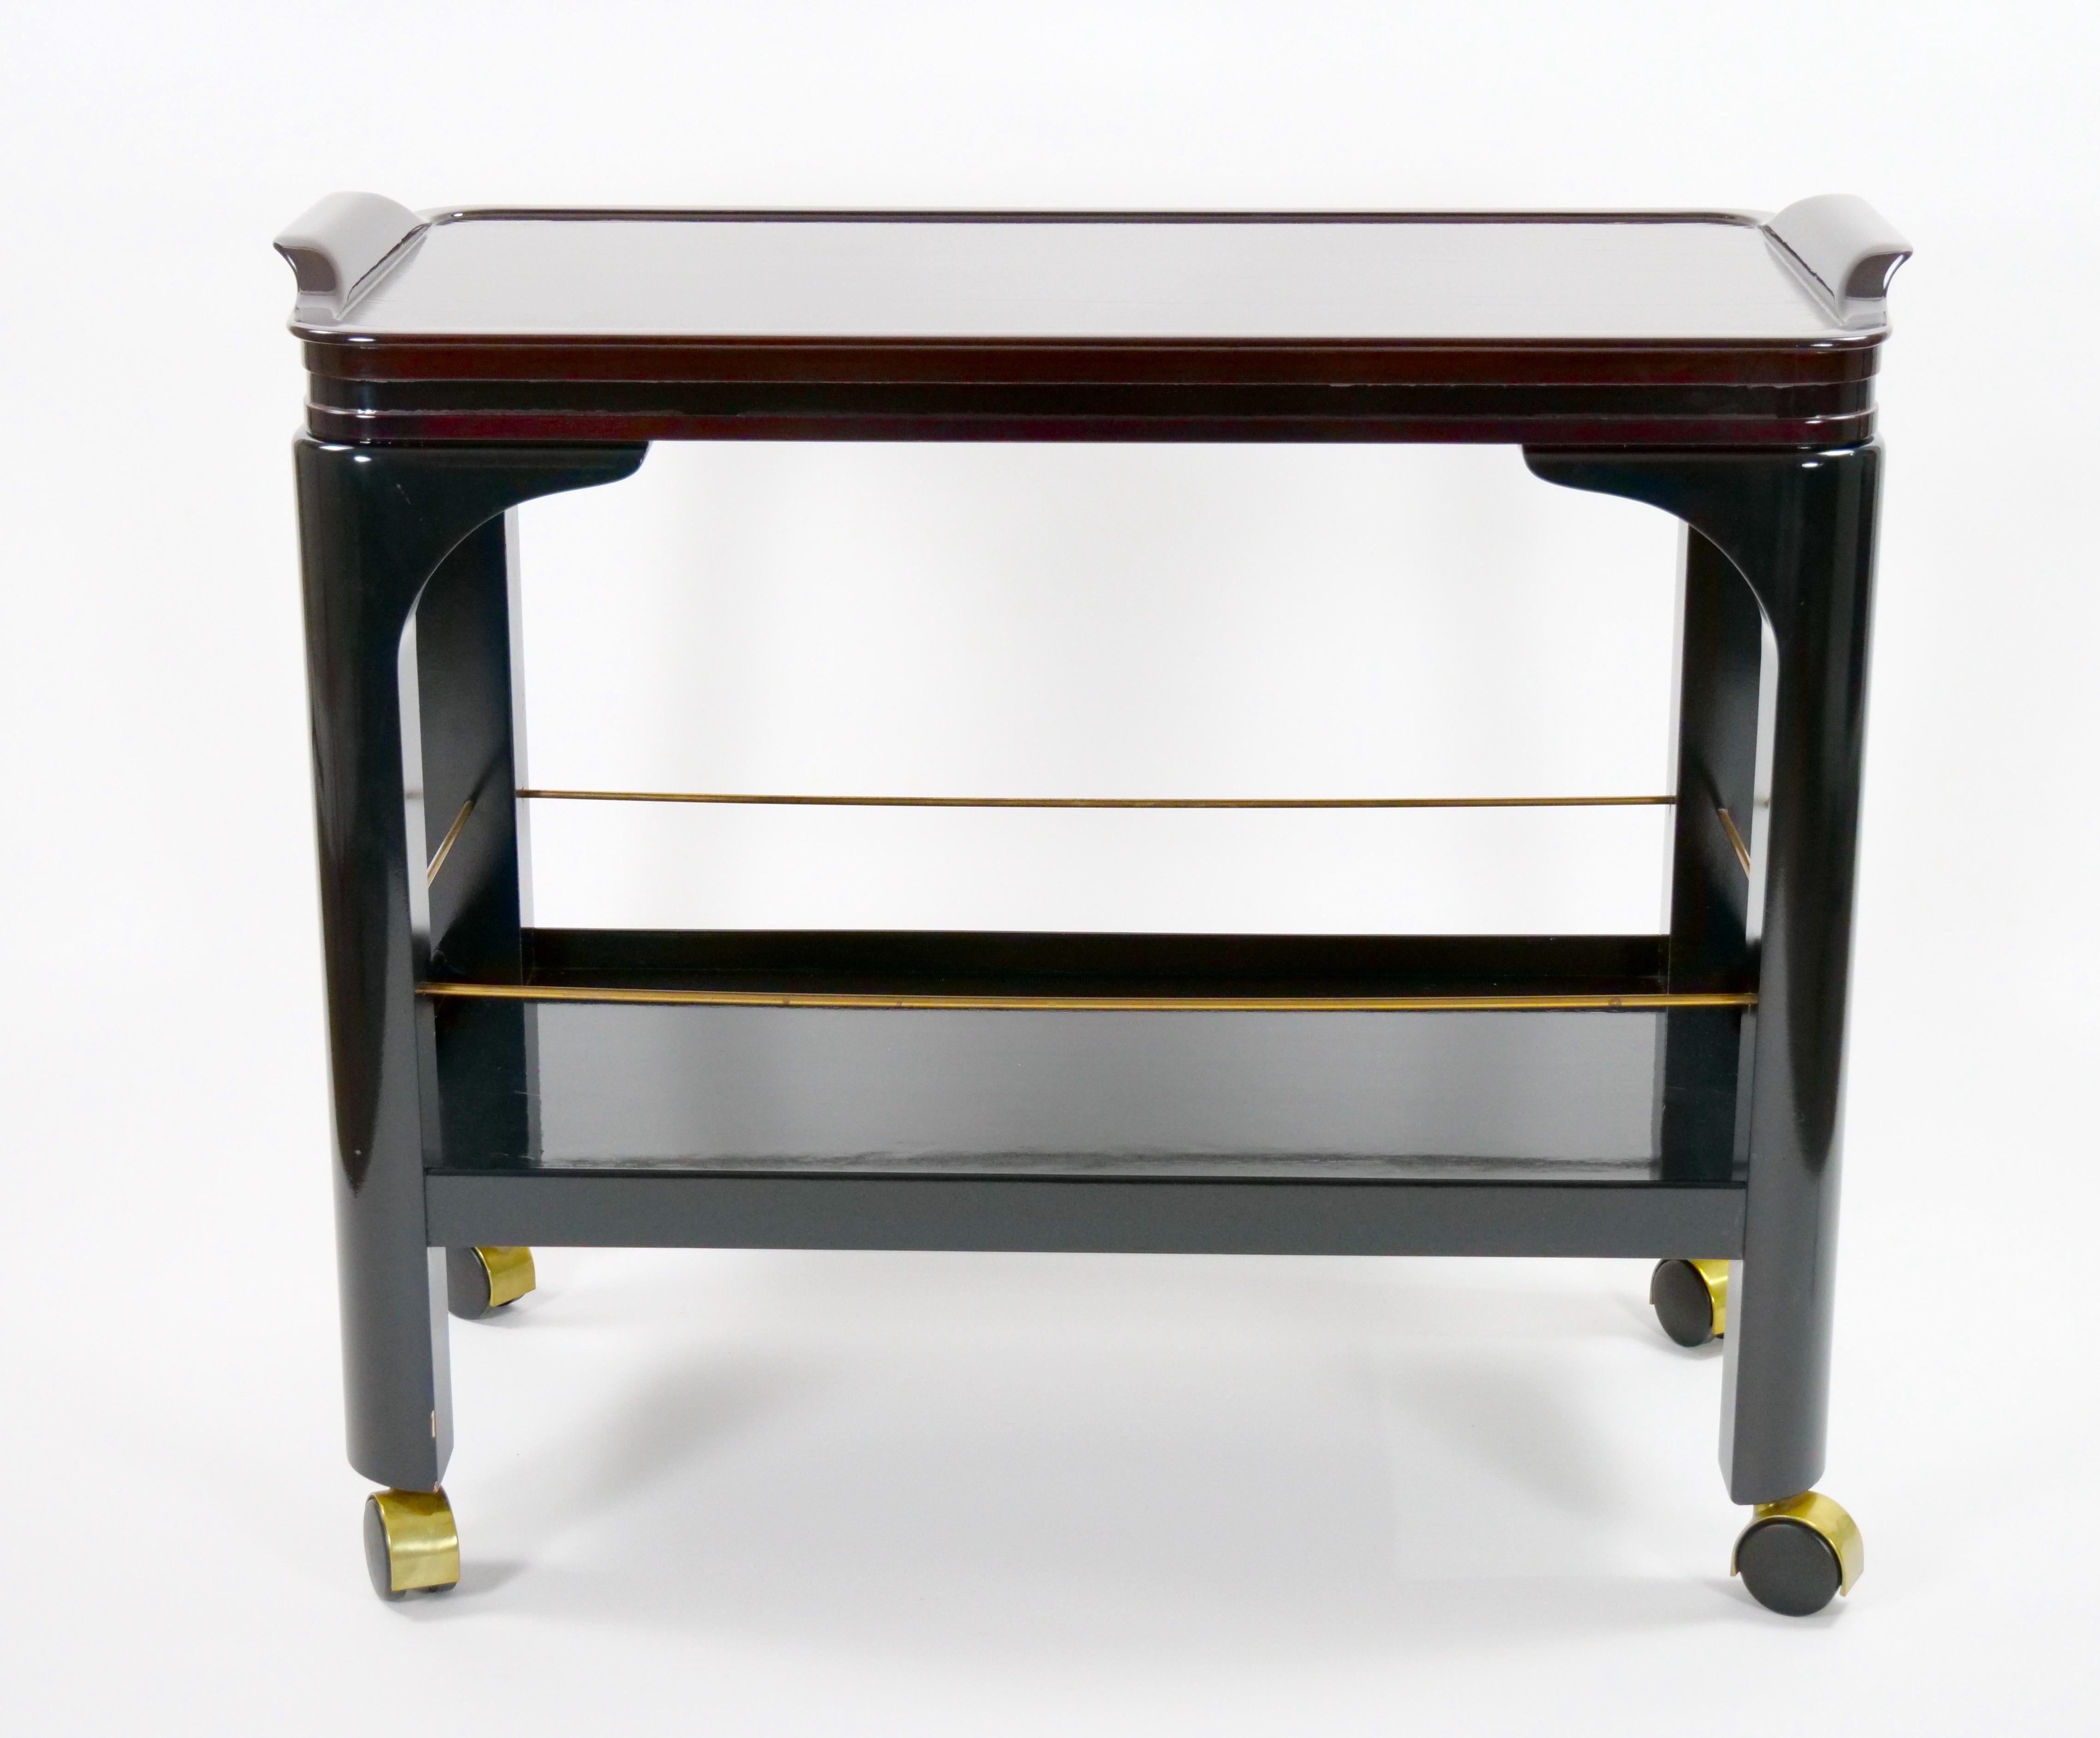  Paul Jones Black Brown lacquered Rolling Serving /Bar Cart, 1960s For Sale 4